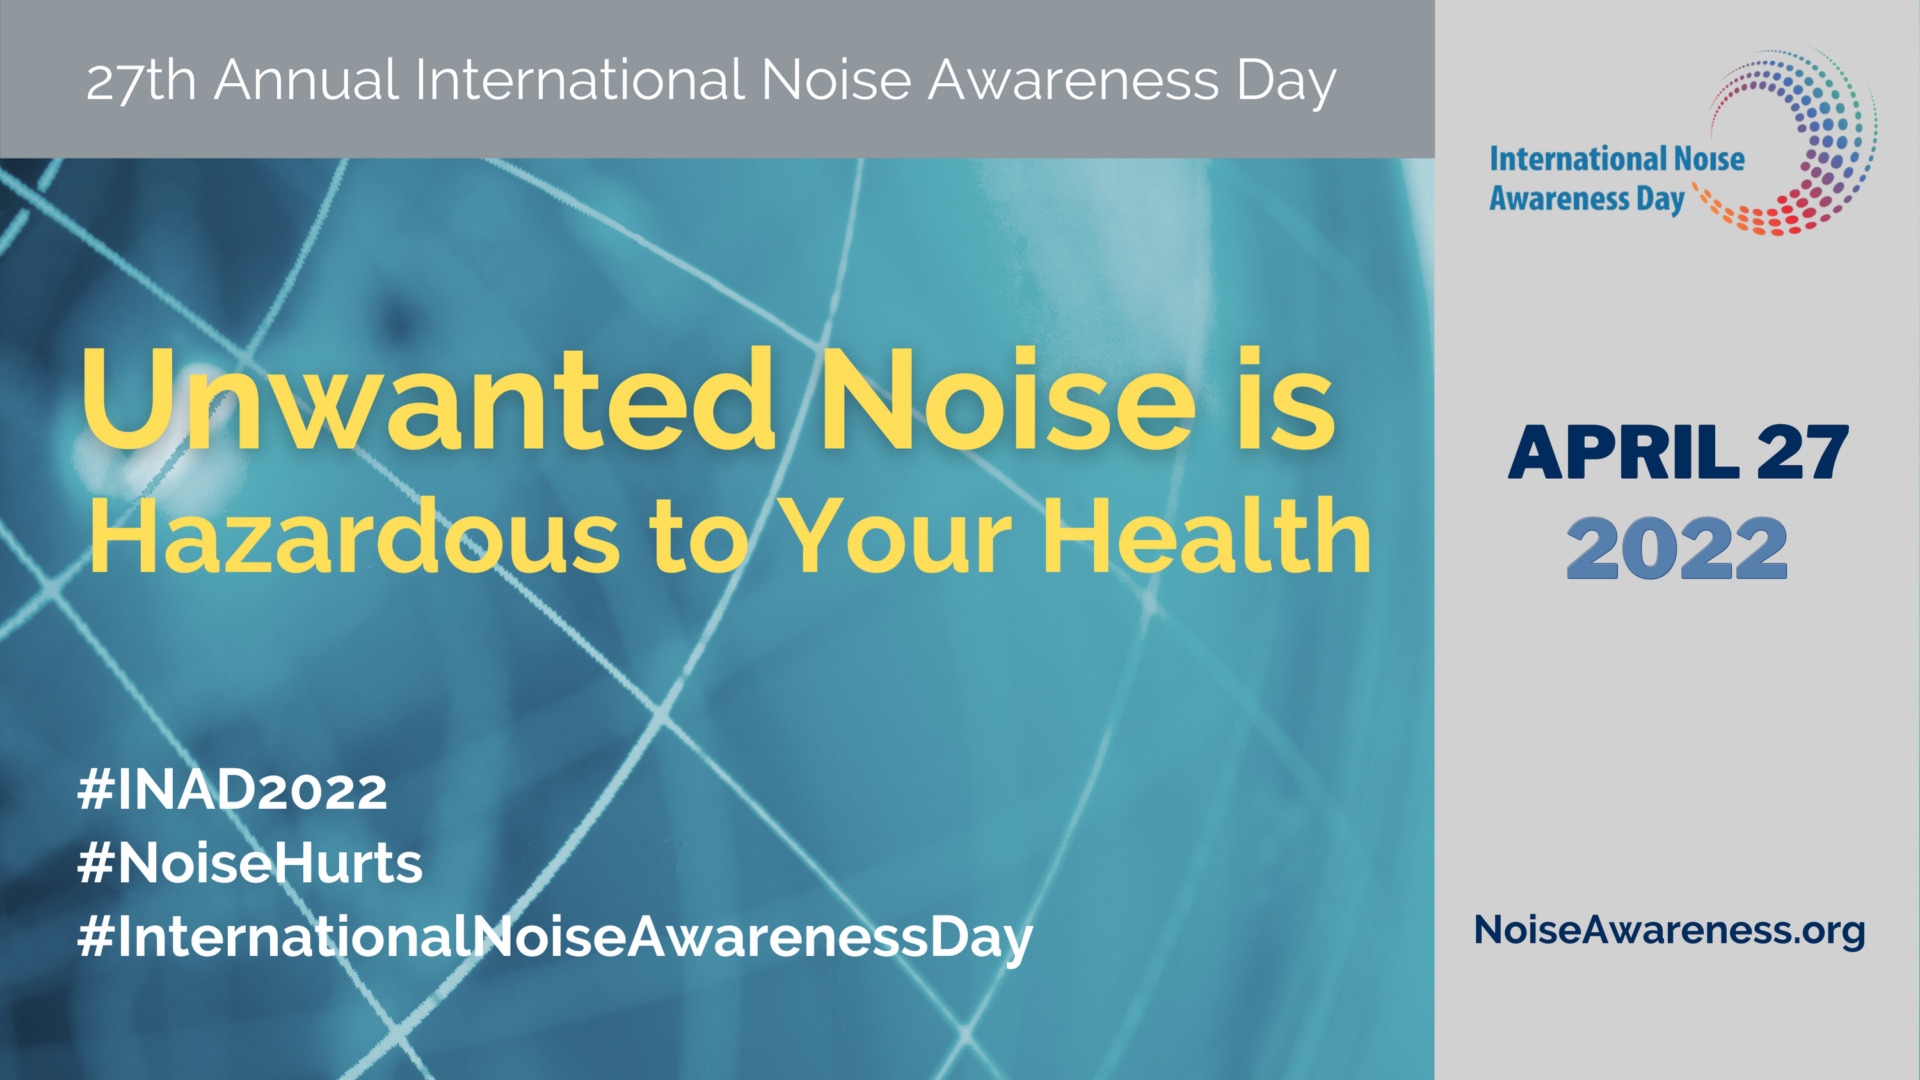 Today is International Noise Awareness Day